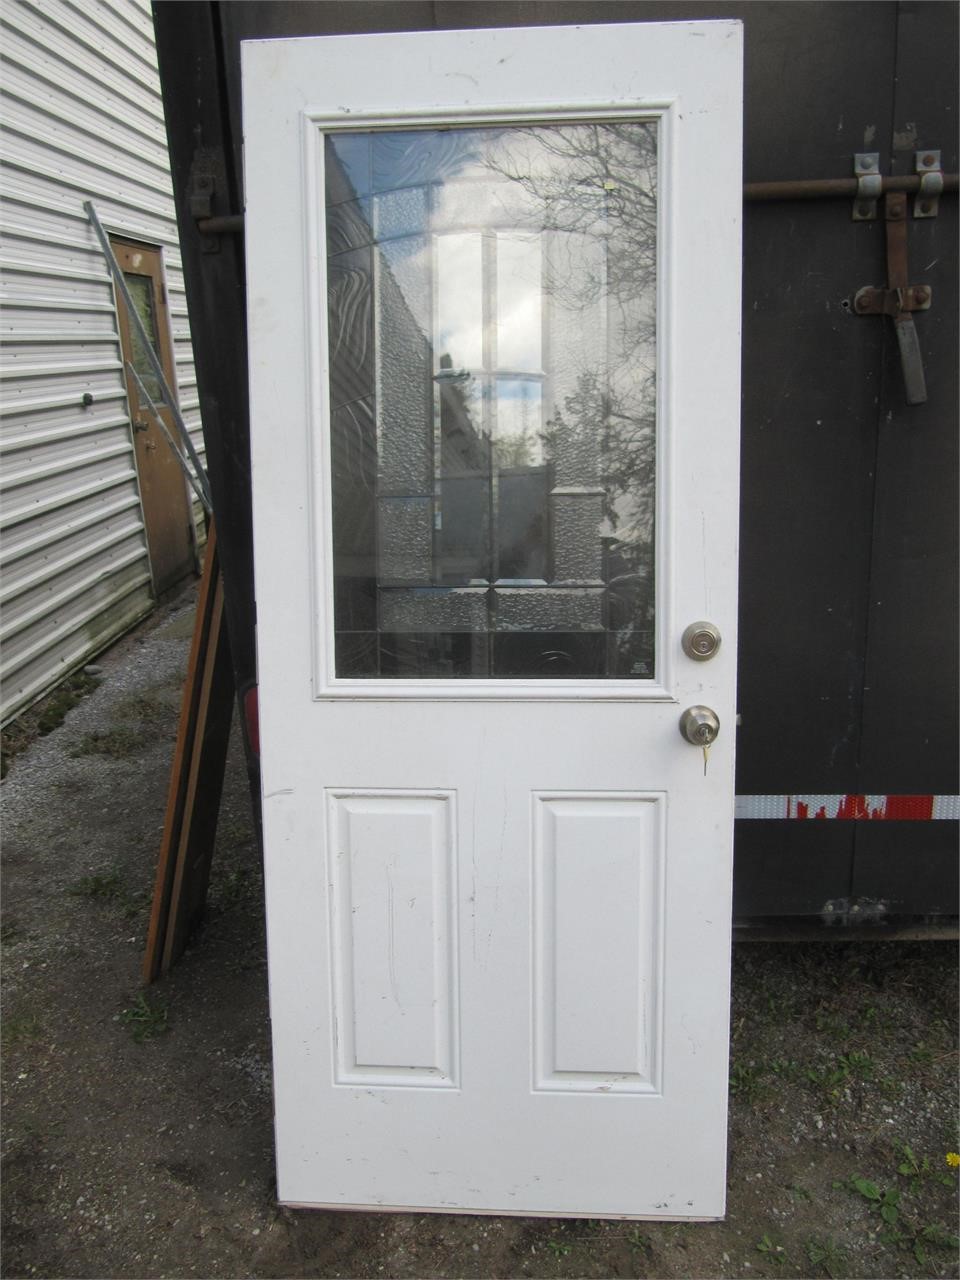 OUTSIDE METAL DOOR WITH GLASS INSERT